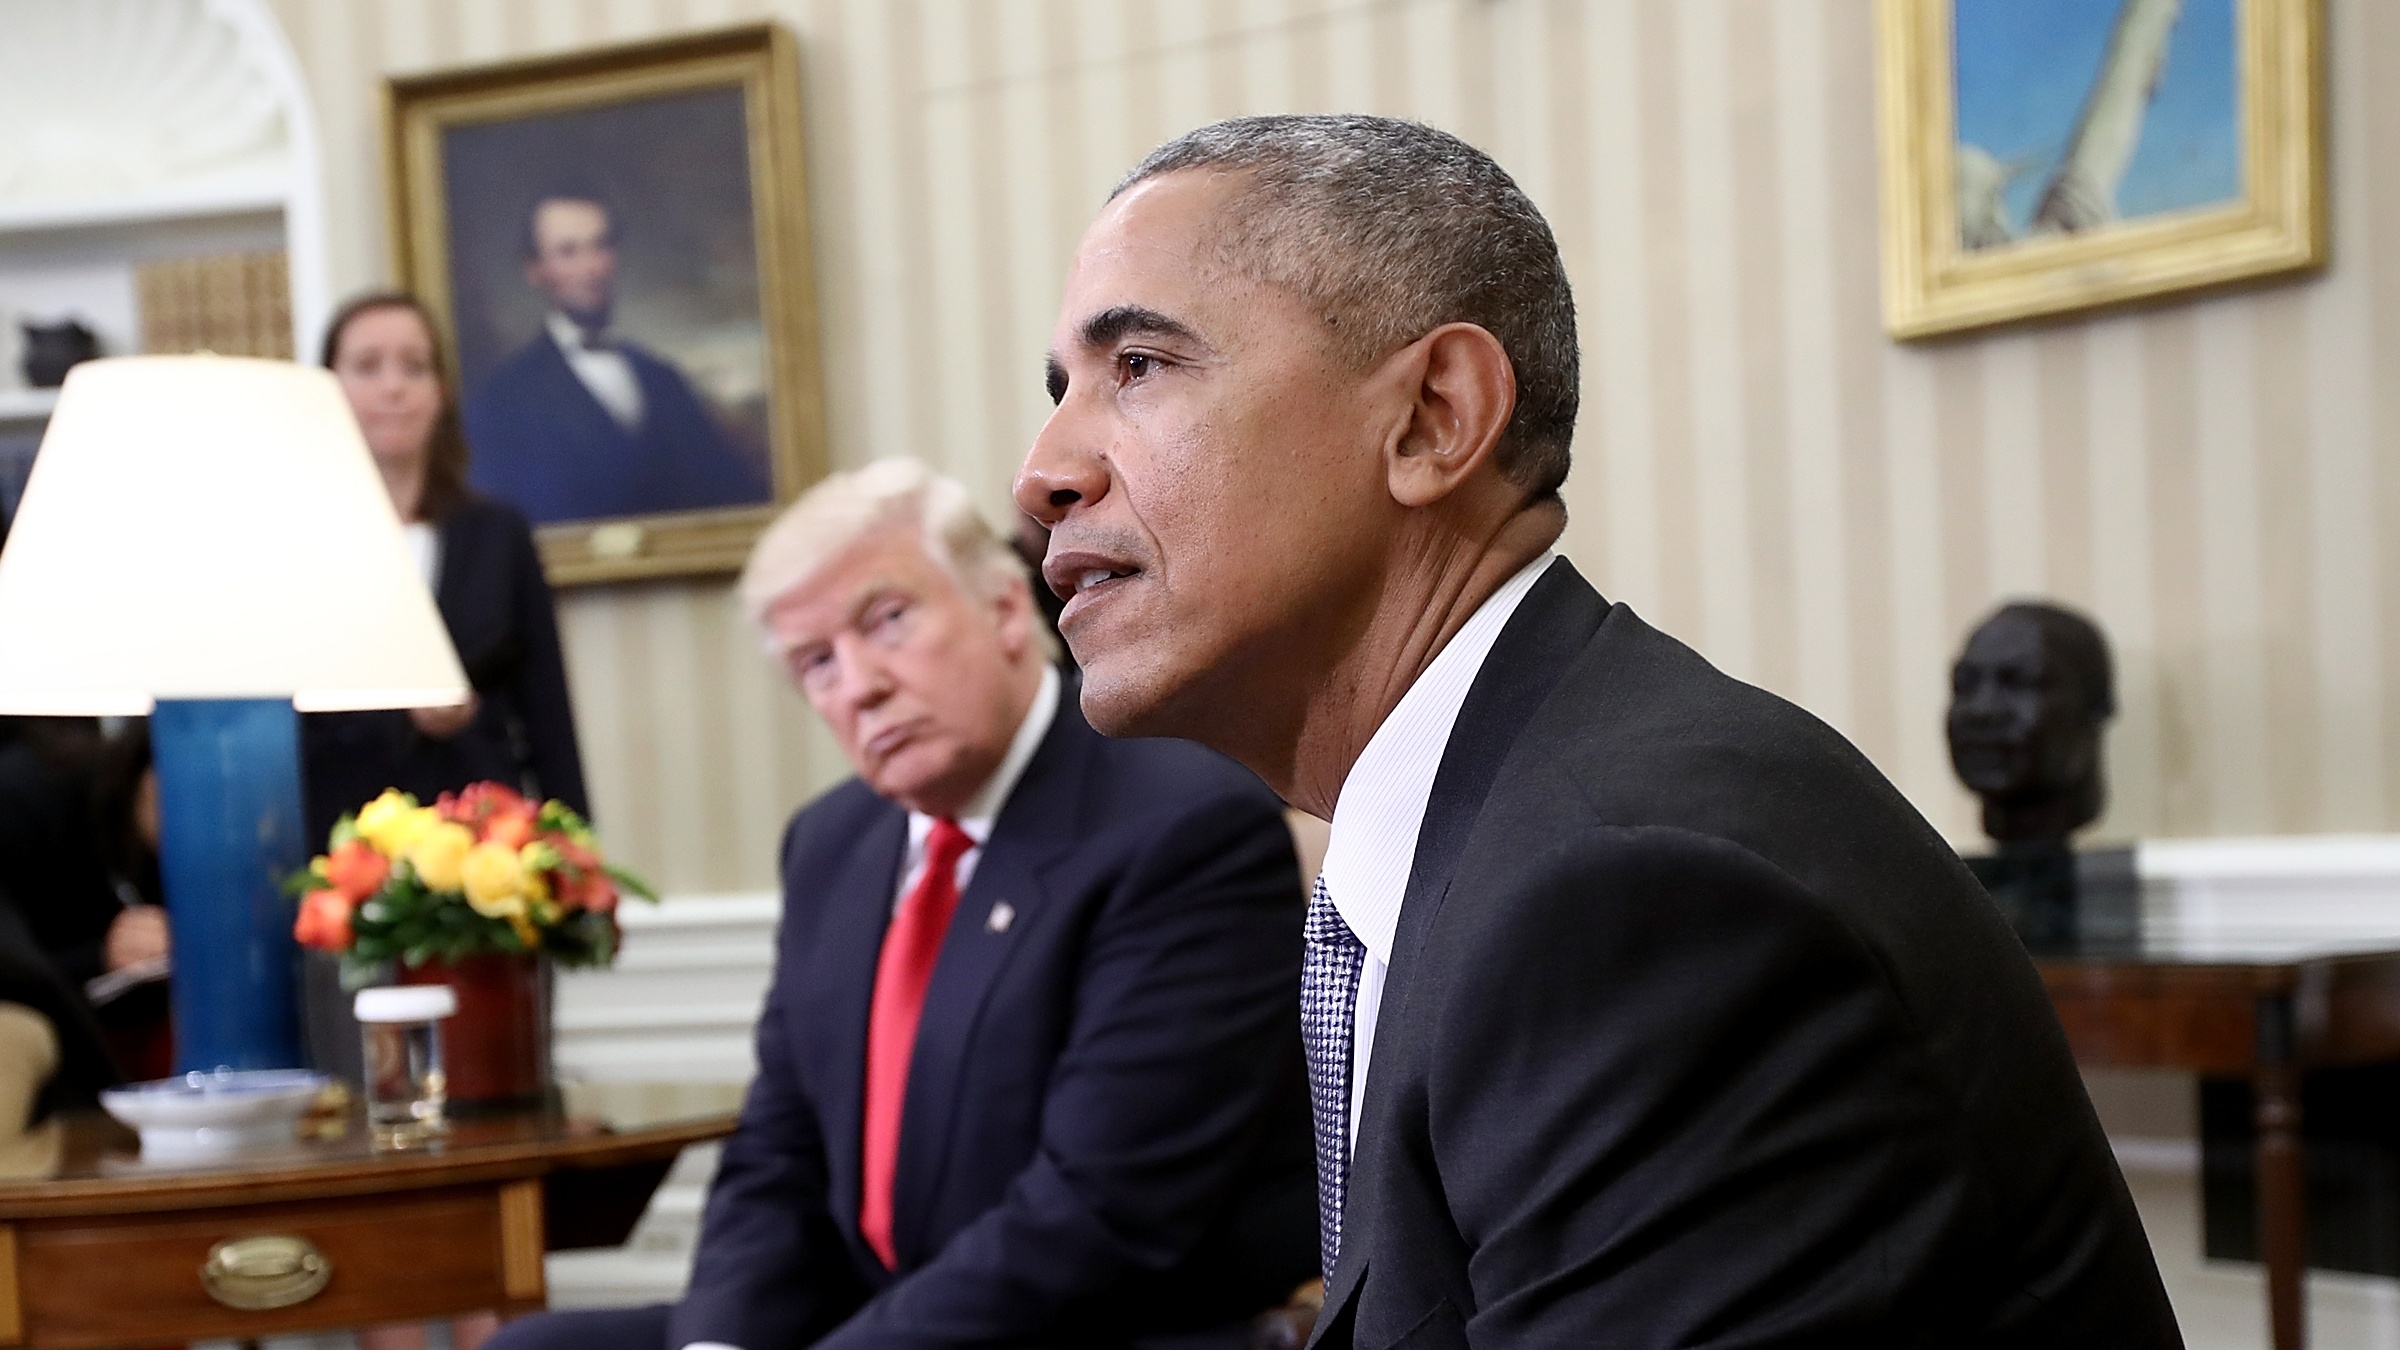 Donald Trump and Barack Obama in the Oval Office in 2016